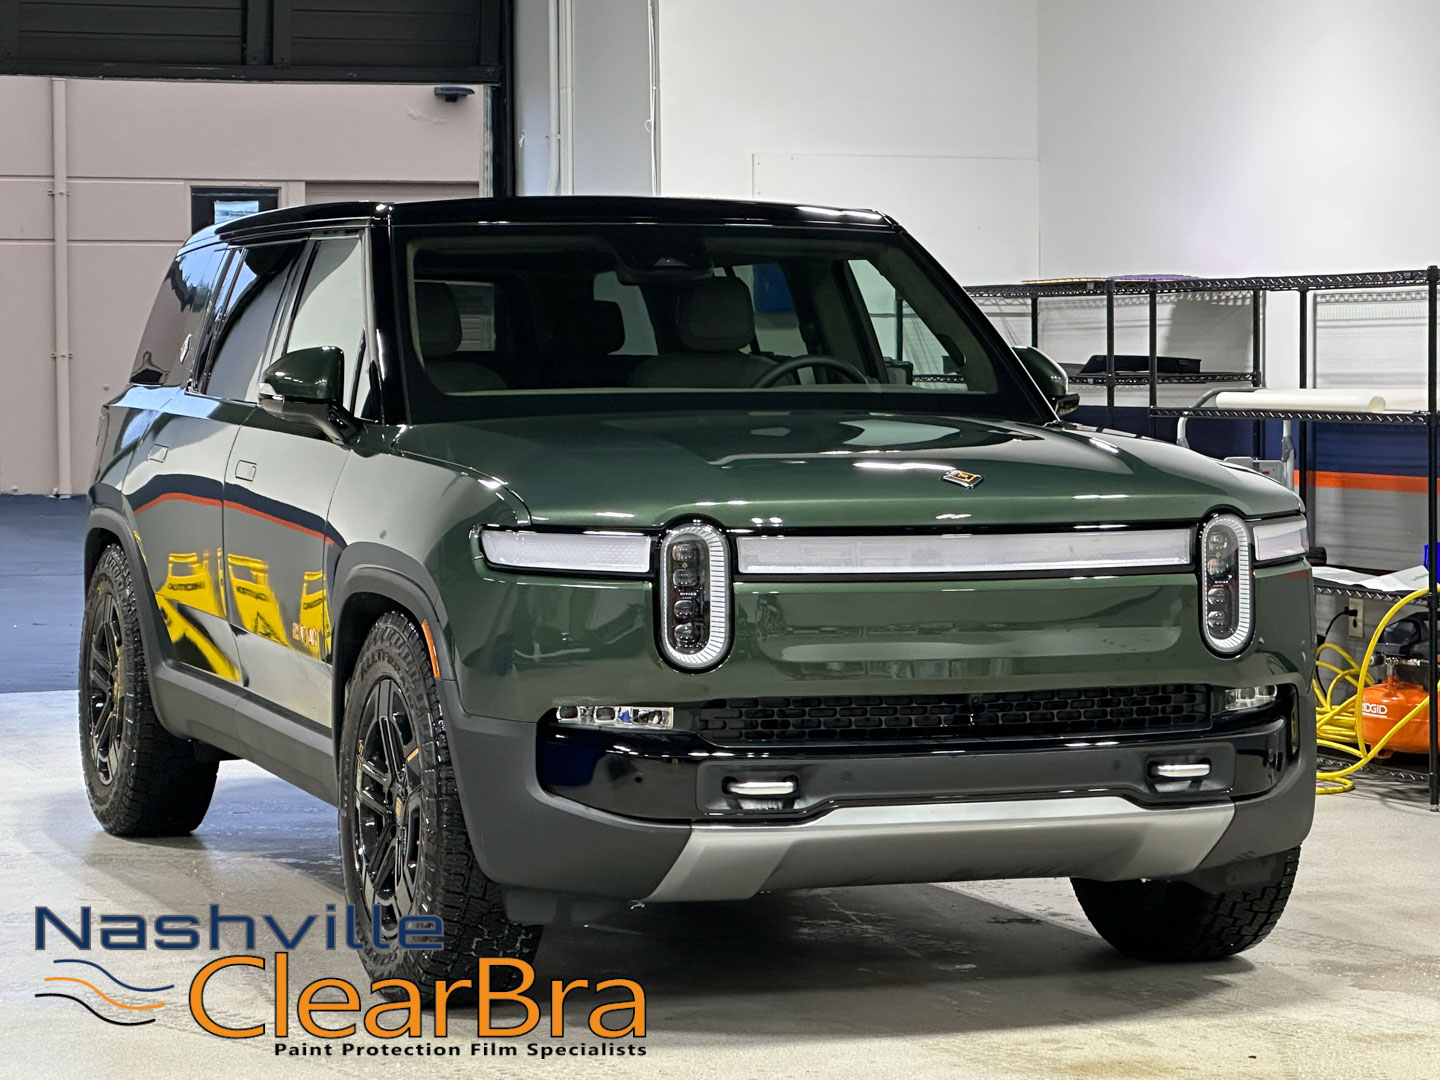 Rivian R1T R1S XPEL Rivian PPF Paint Protection Film Tint Ceramic Coating Vinyl Wrap nashville-clearbra-xpel-ultimate-fusion-prime-clear-bra-ceramic-tint-ppf-paint-protection-film